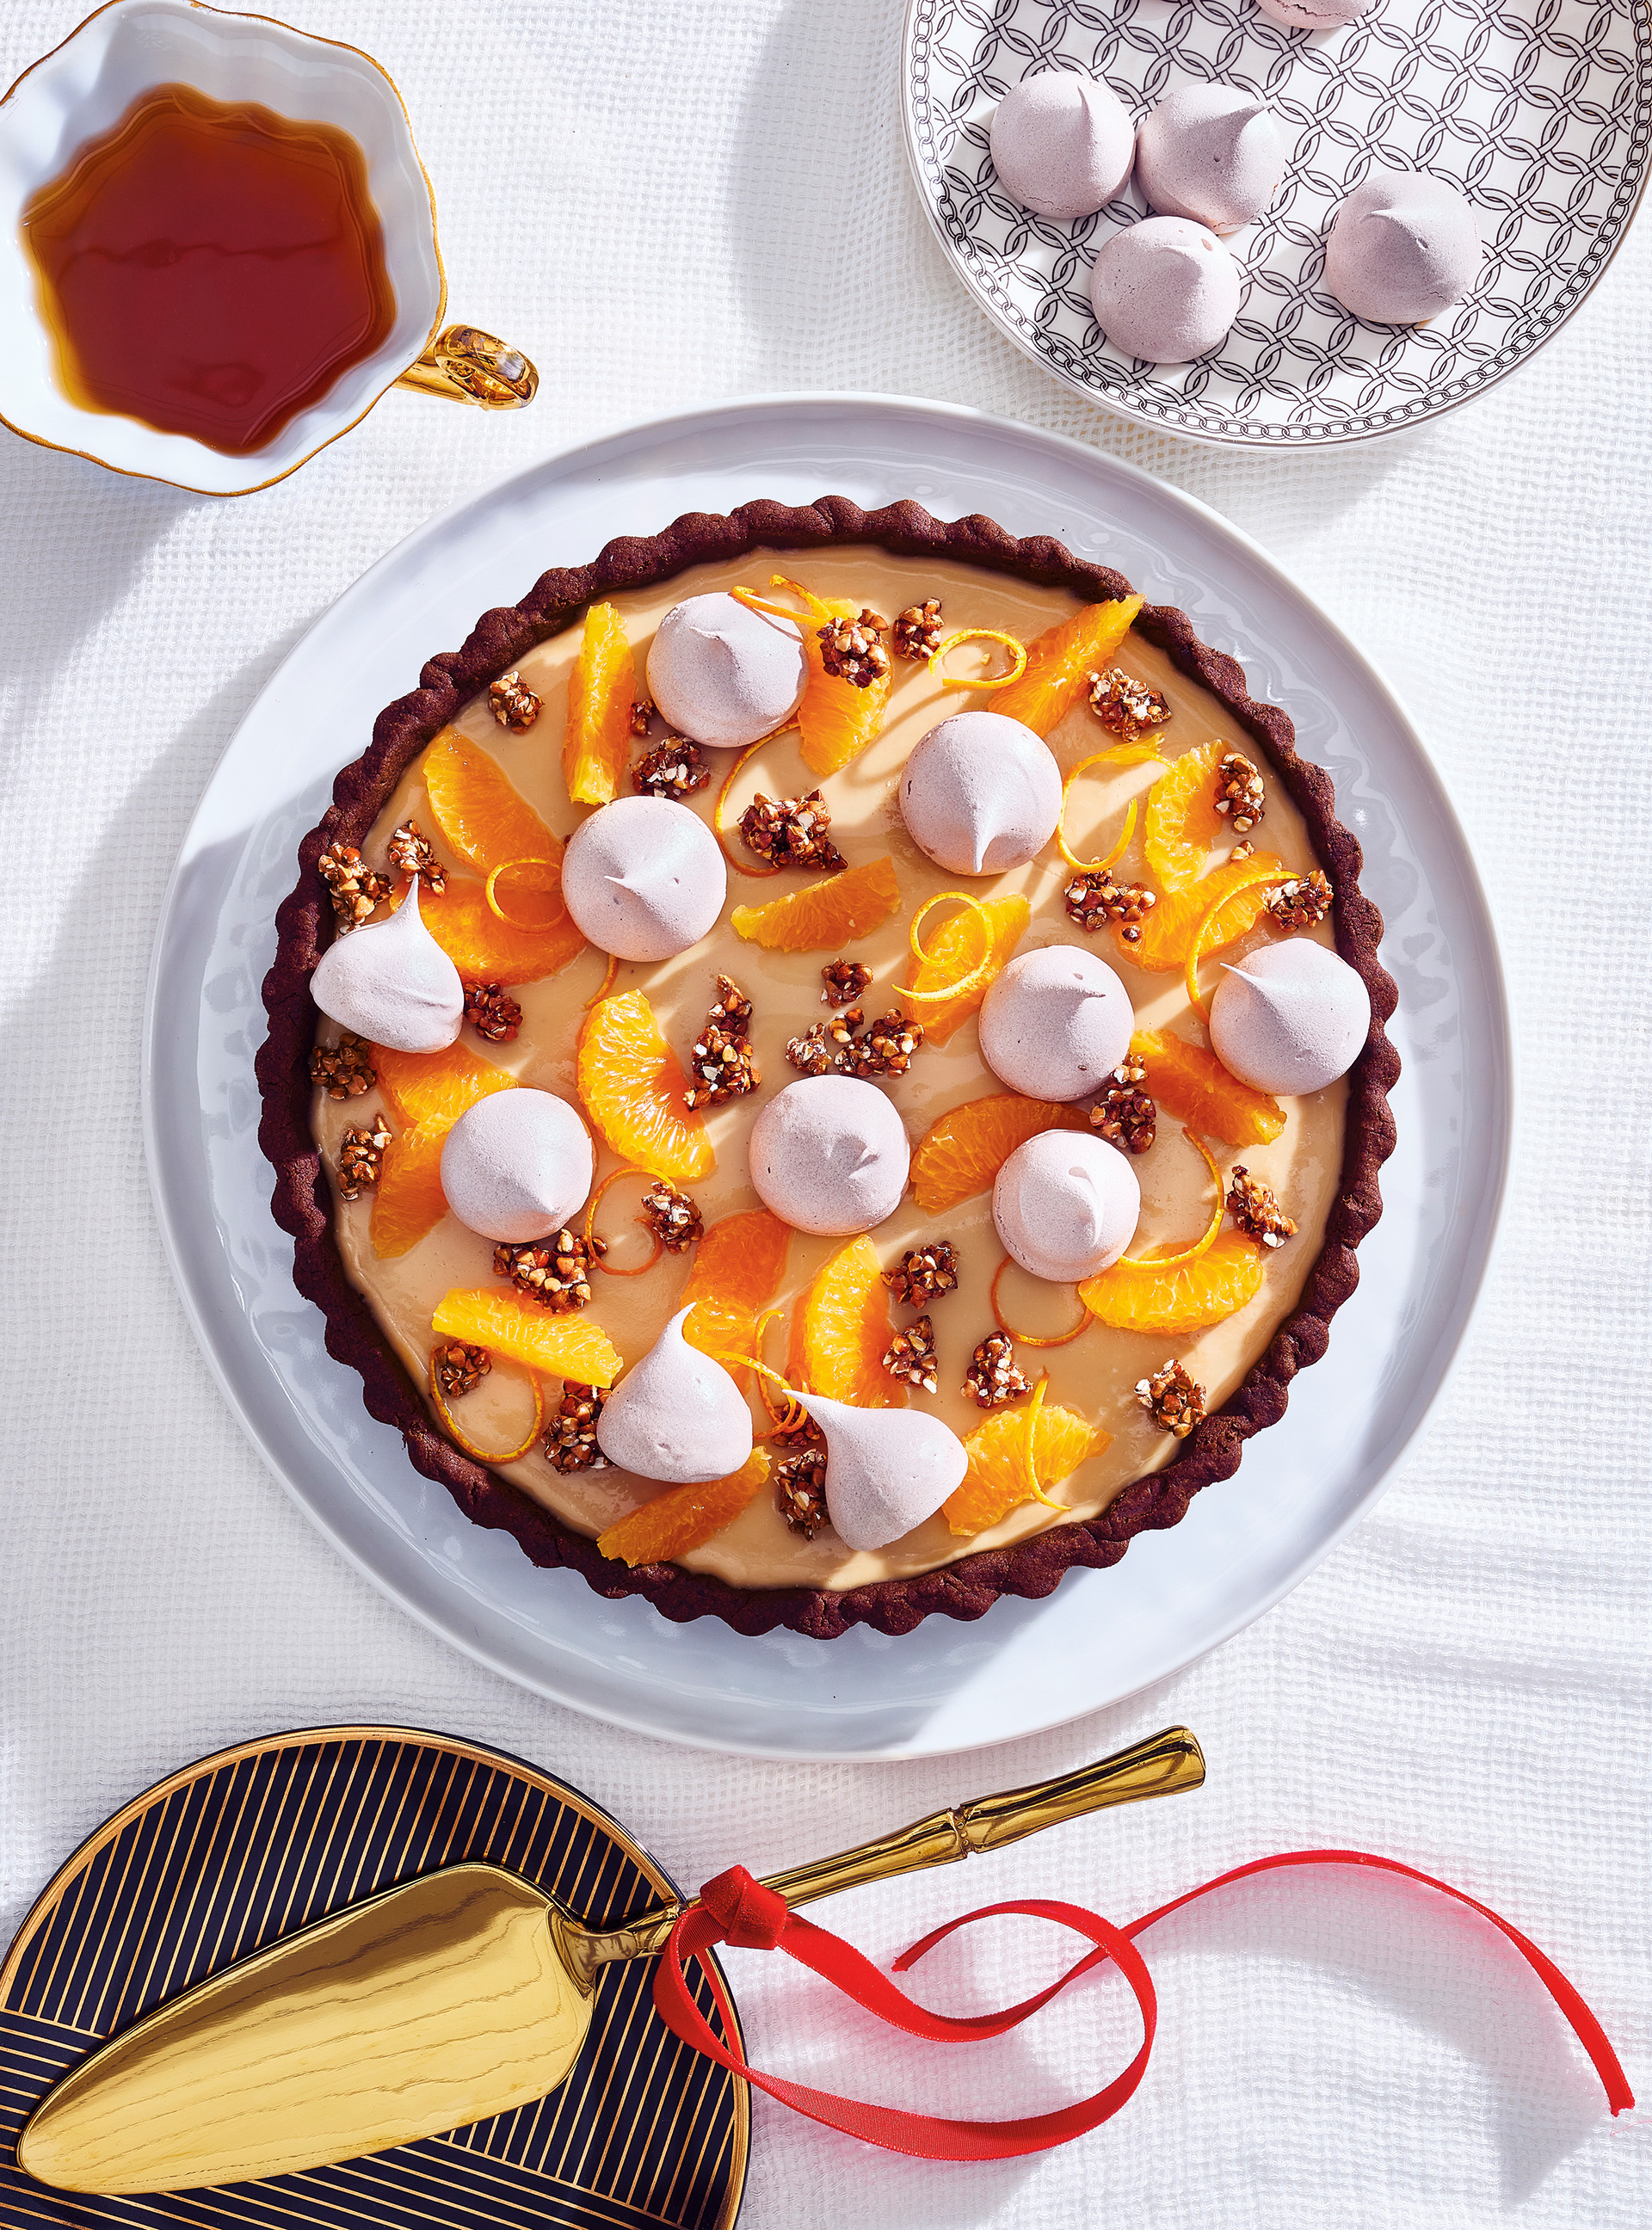 Caramelized White Chocolate Tart with Clementines